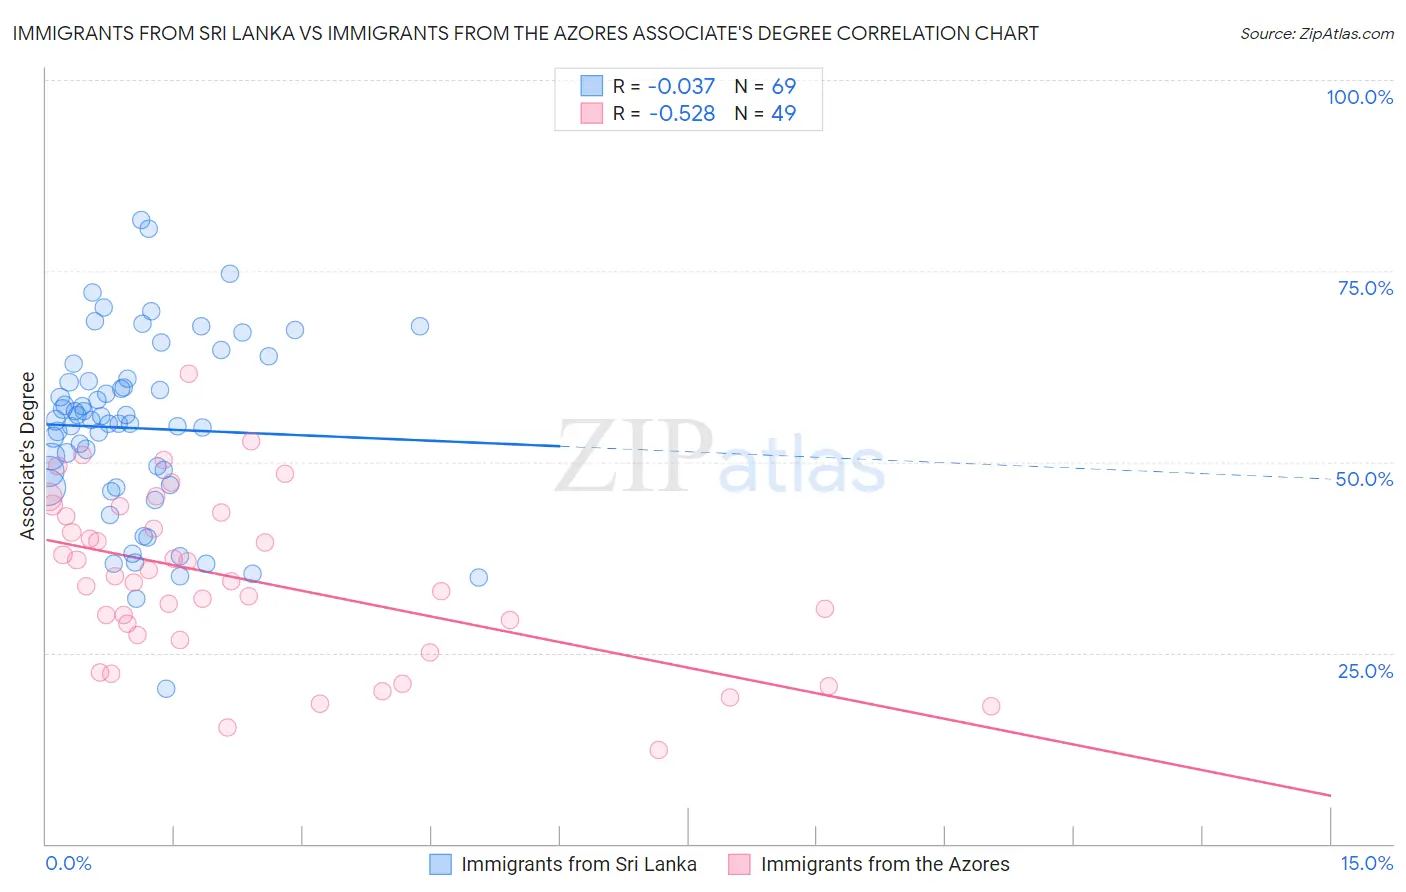 Immigrants from Sri Lanka vs Immigrants from the Azores Associate's Degree